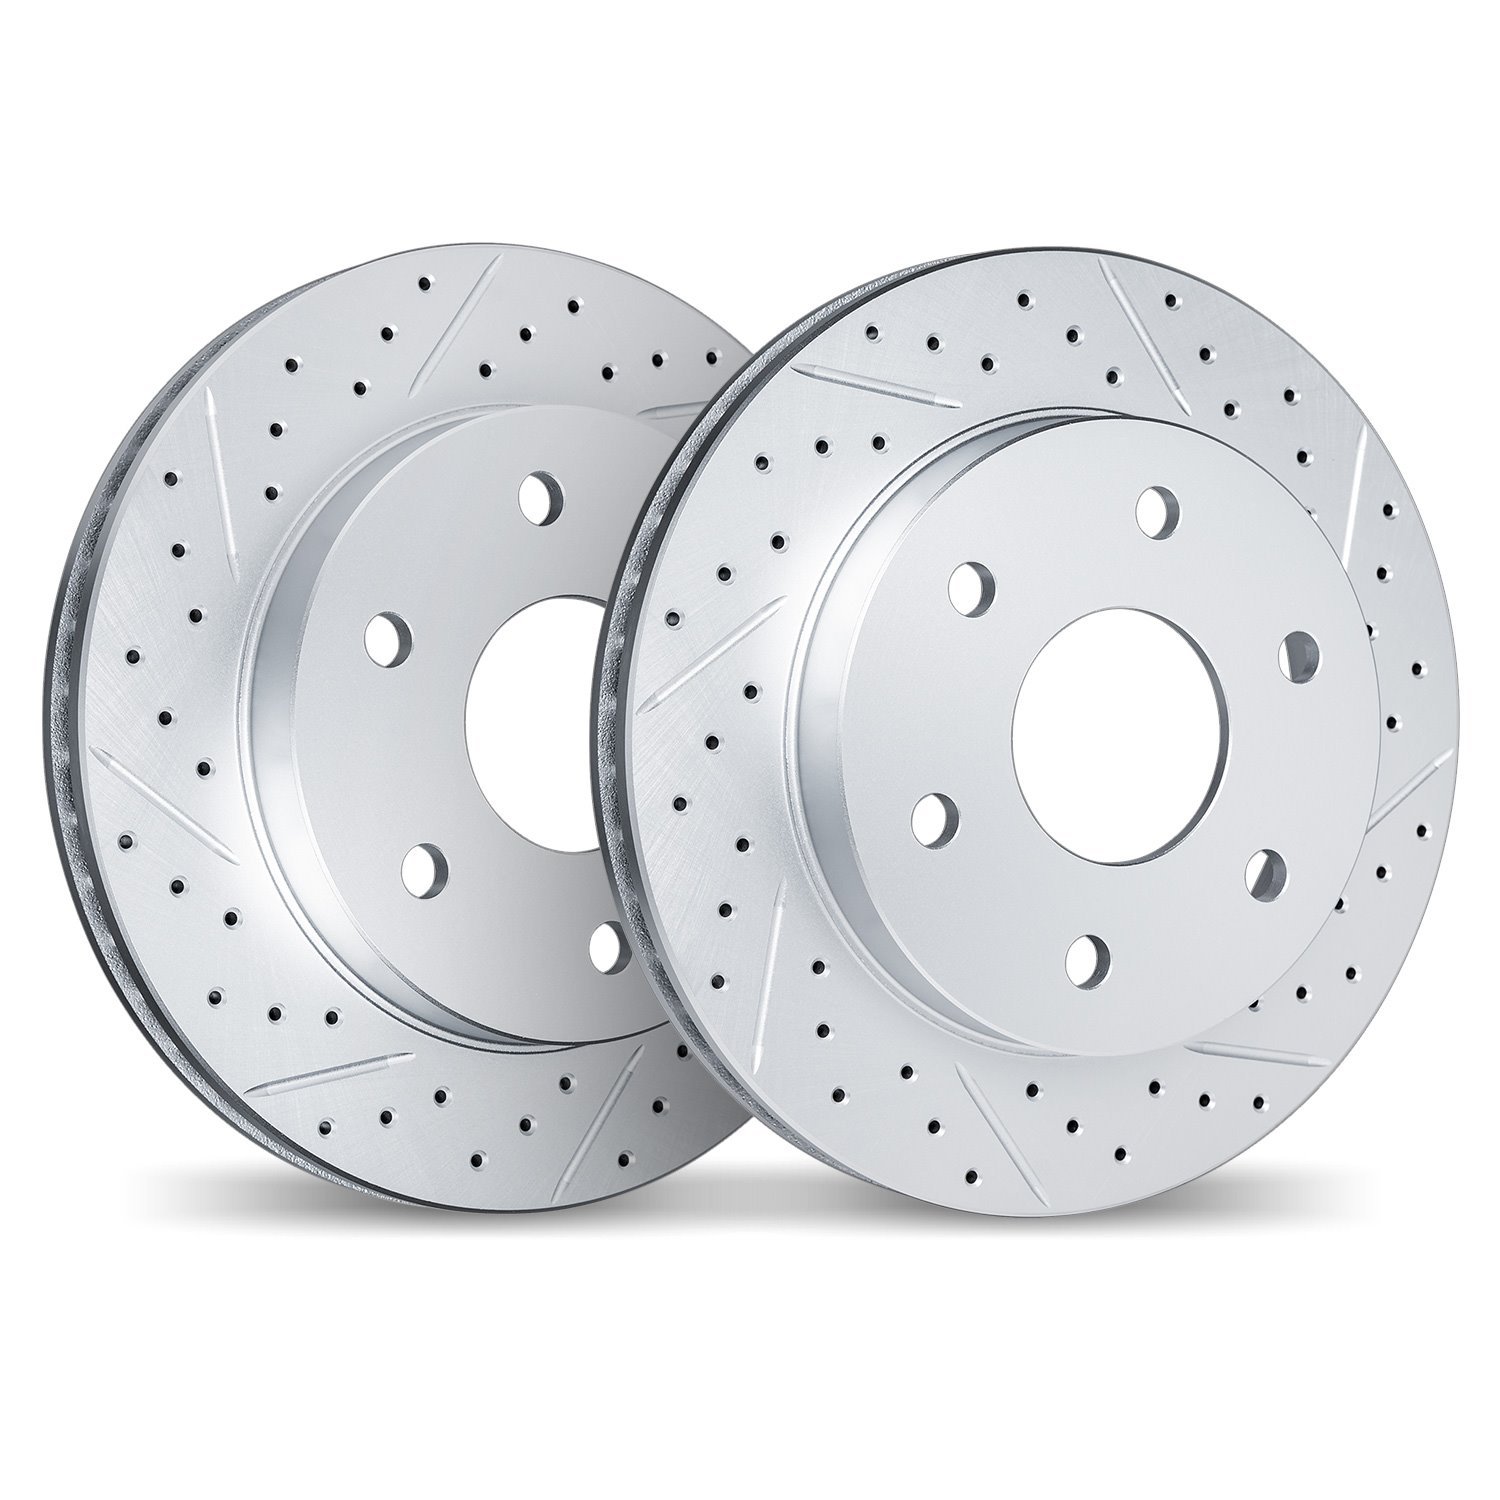 2002-54055 Geoperformance Drilled/Slotted Brake Rotors, 2009-2009 Ford/Lincoln/Mercury/Mazda, Position: Front